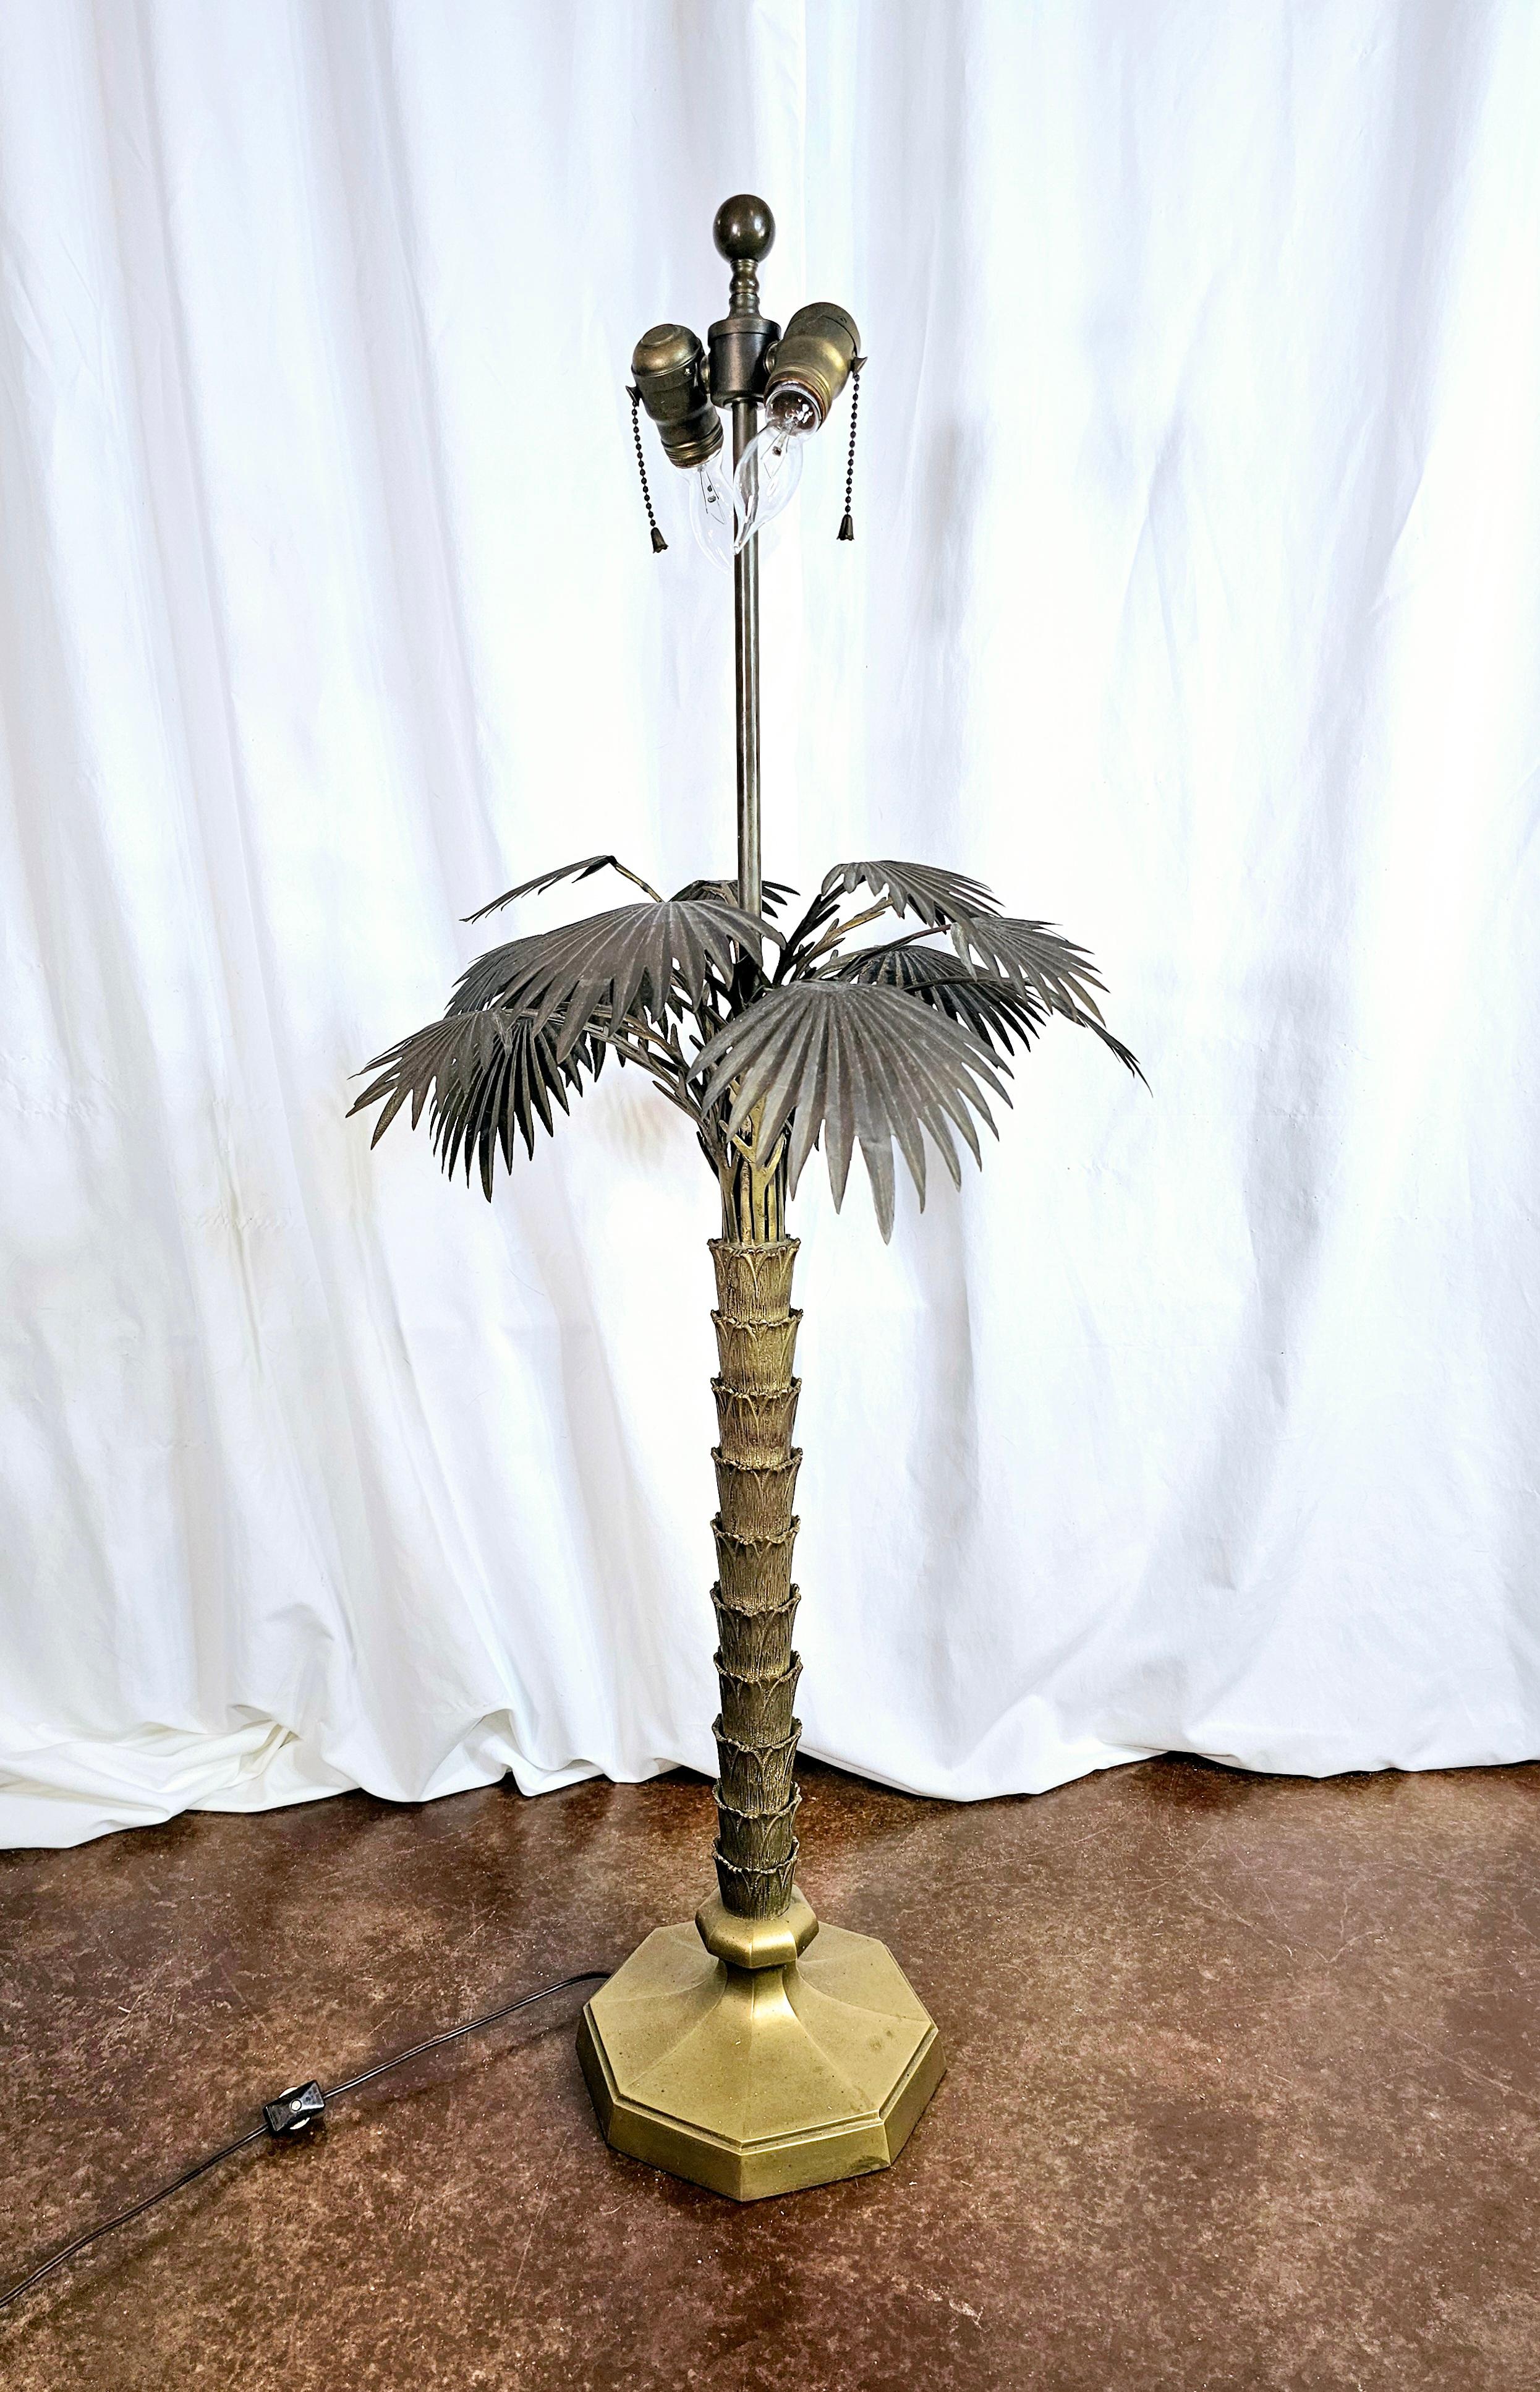 Mid century modern.
Brass palm tree frond table lamp by Chapman.
Classic figurative styling. 
Intricate details. 
3 lighting settings, pictured.
Fully functional. 

This piece is almost entirely brass.
Very solid with good weight. 
Could support a